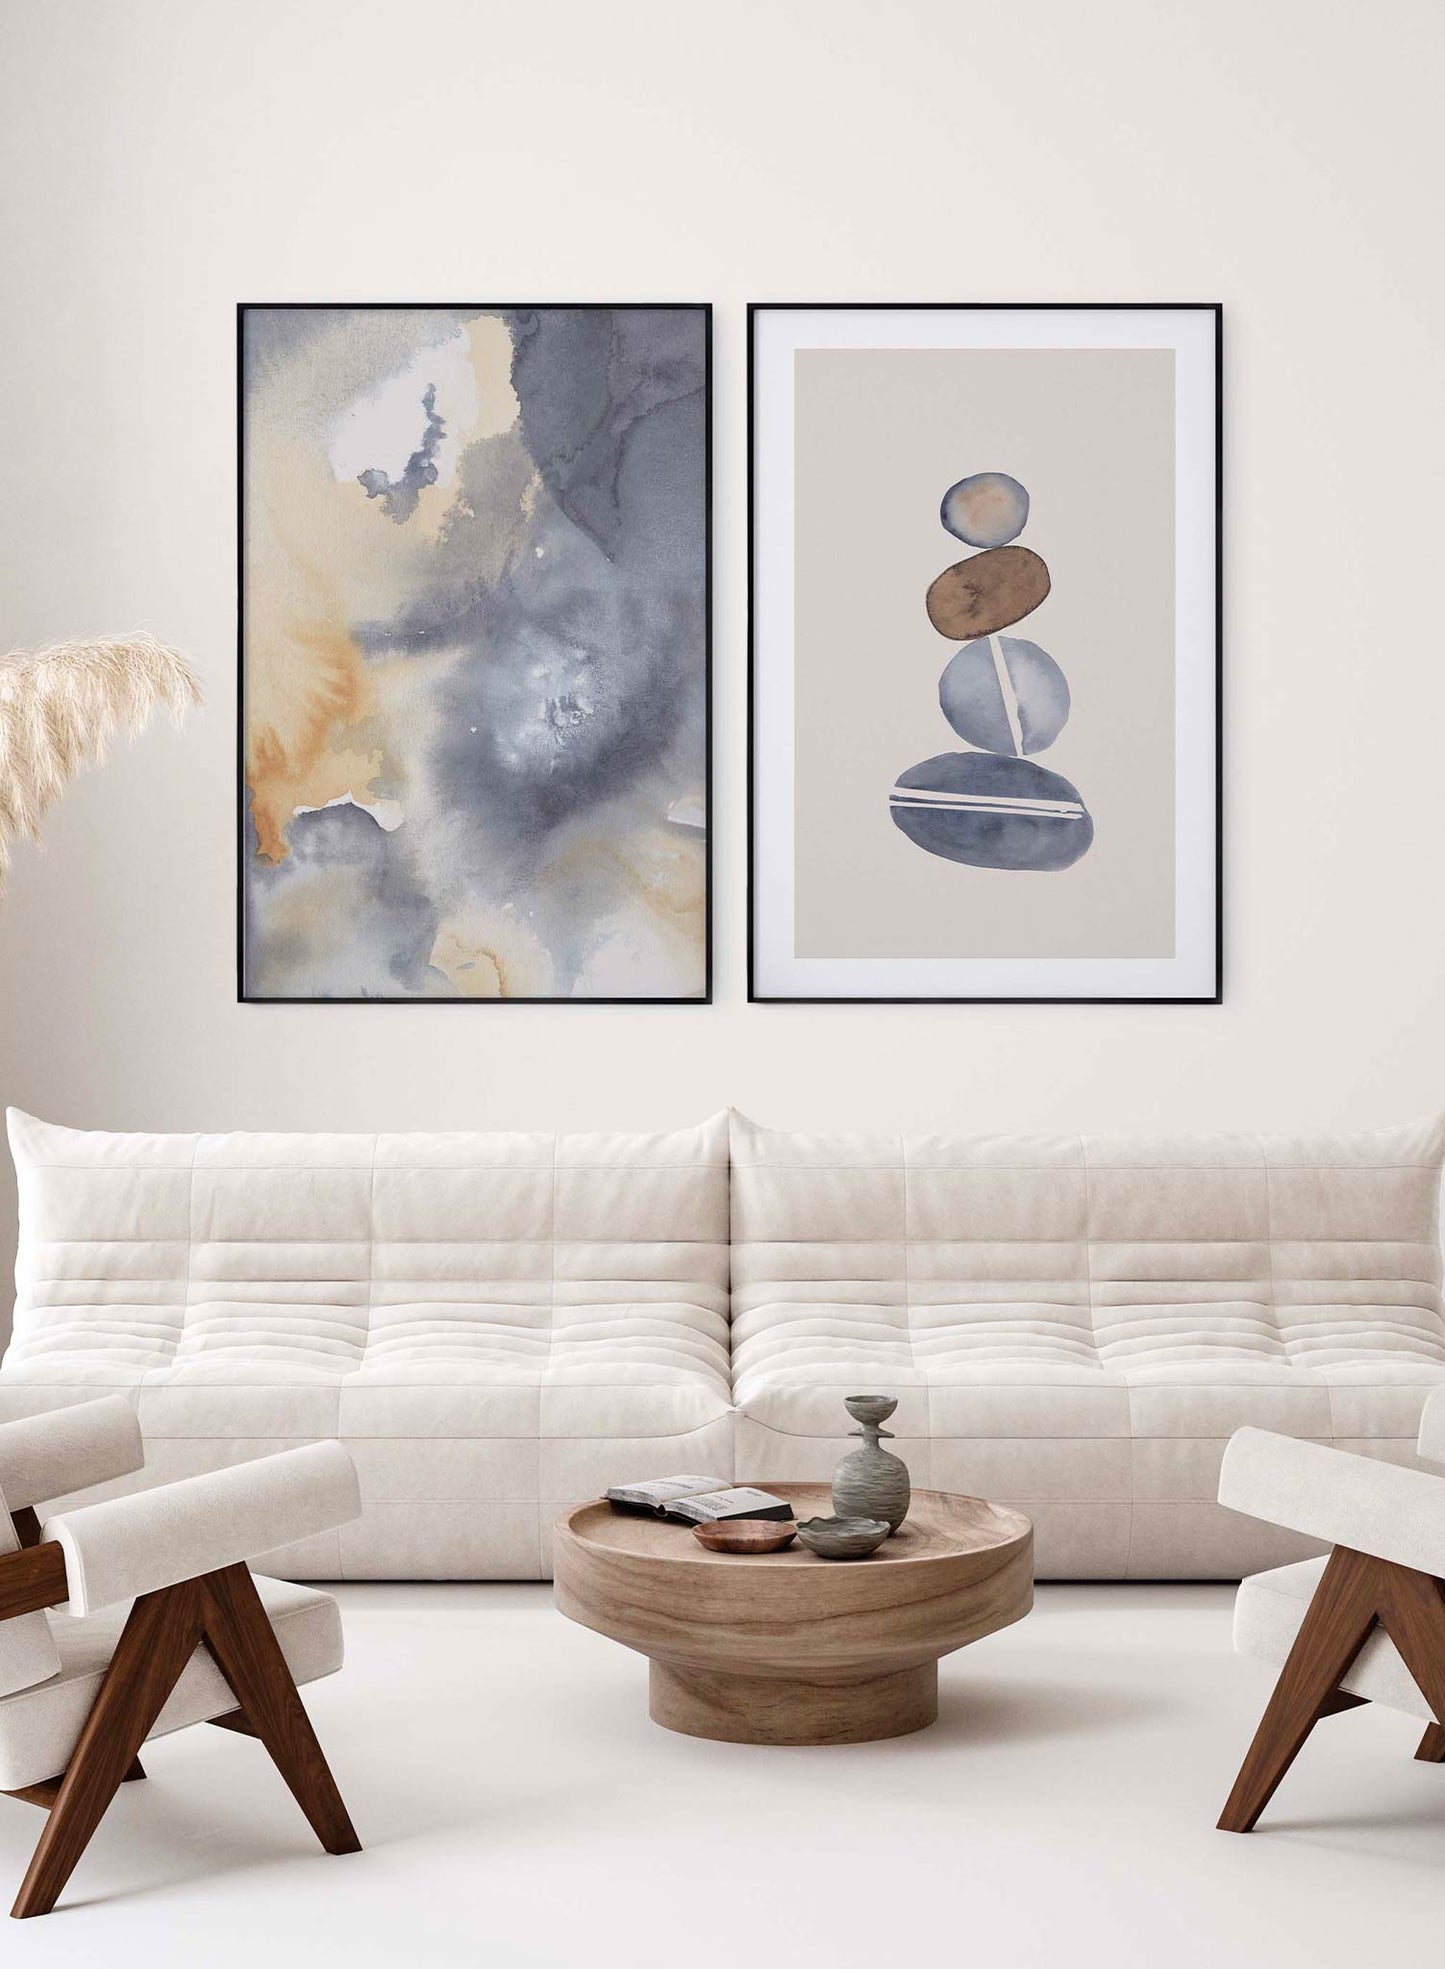 Stacked Stones is a minimalist illustration by Opposite Wall of four stacked stones of different styles and colours.